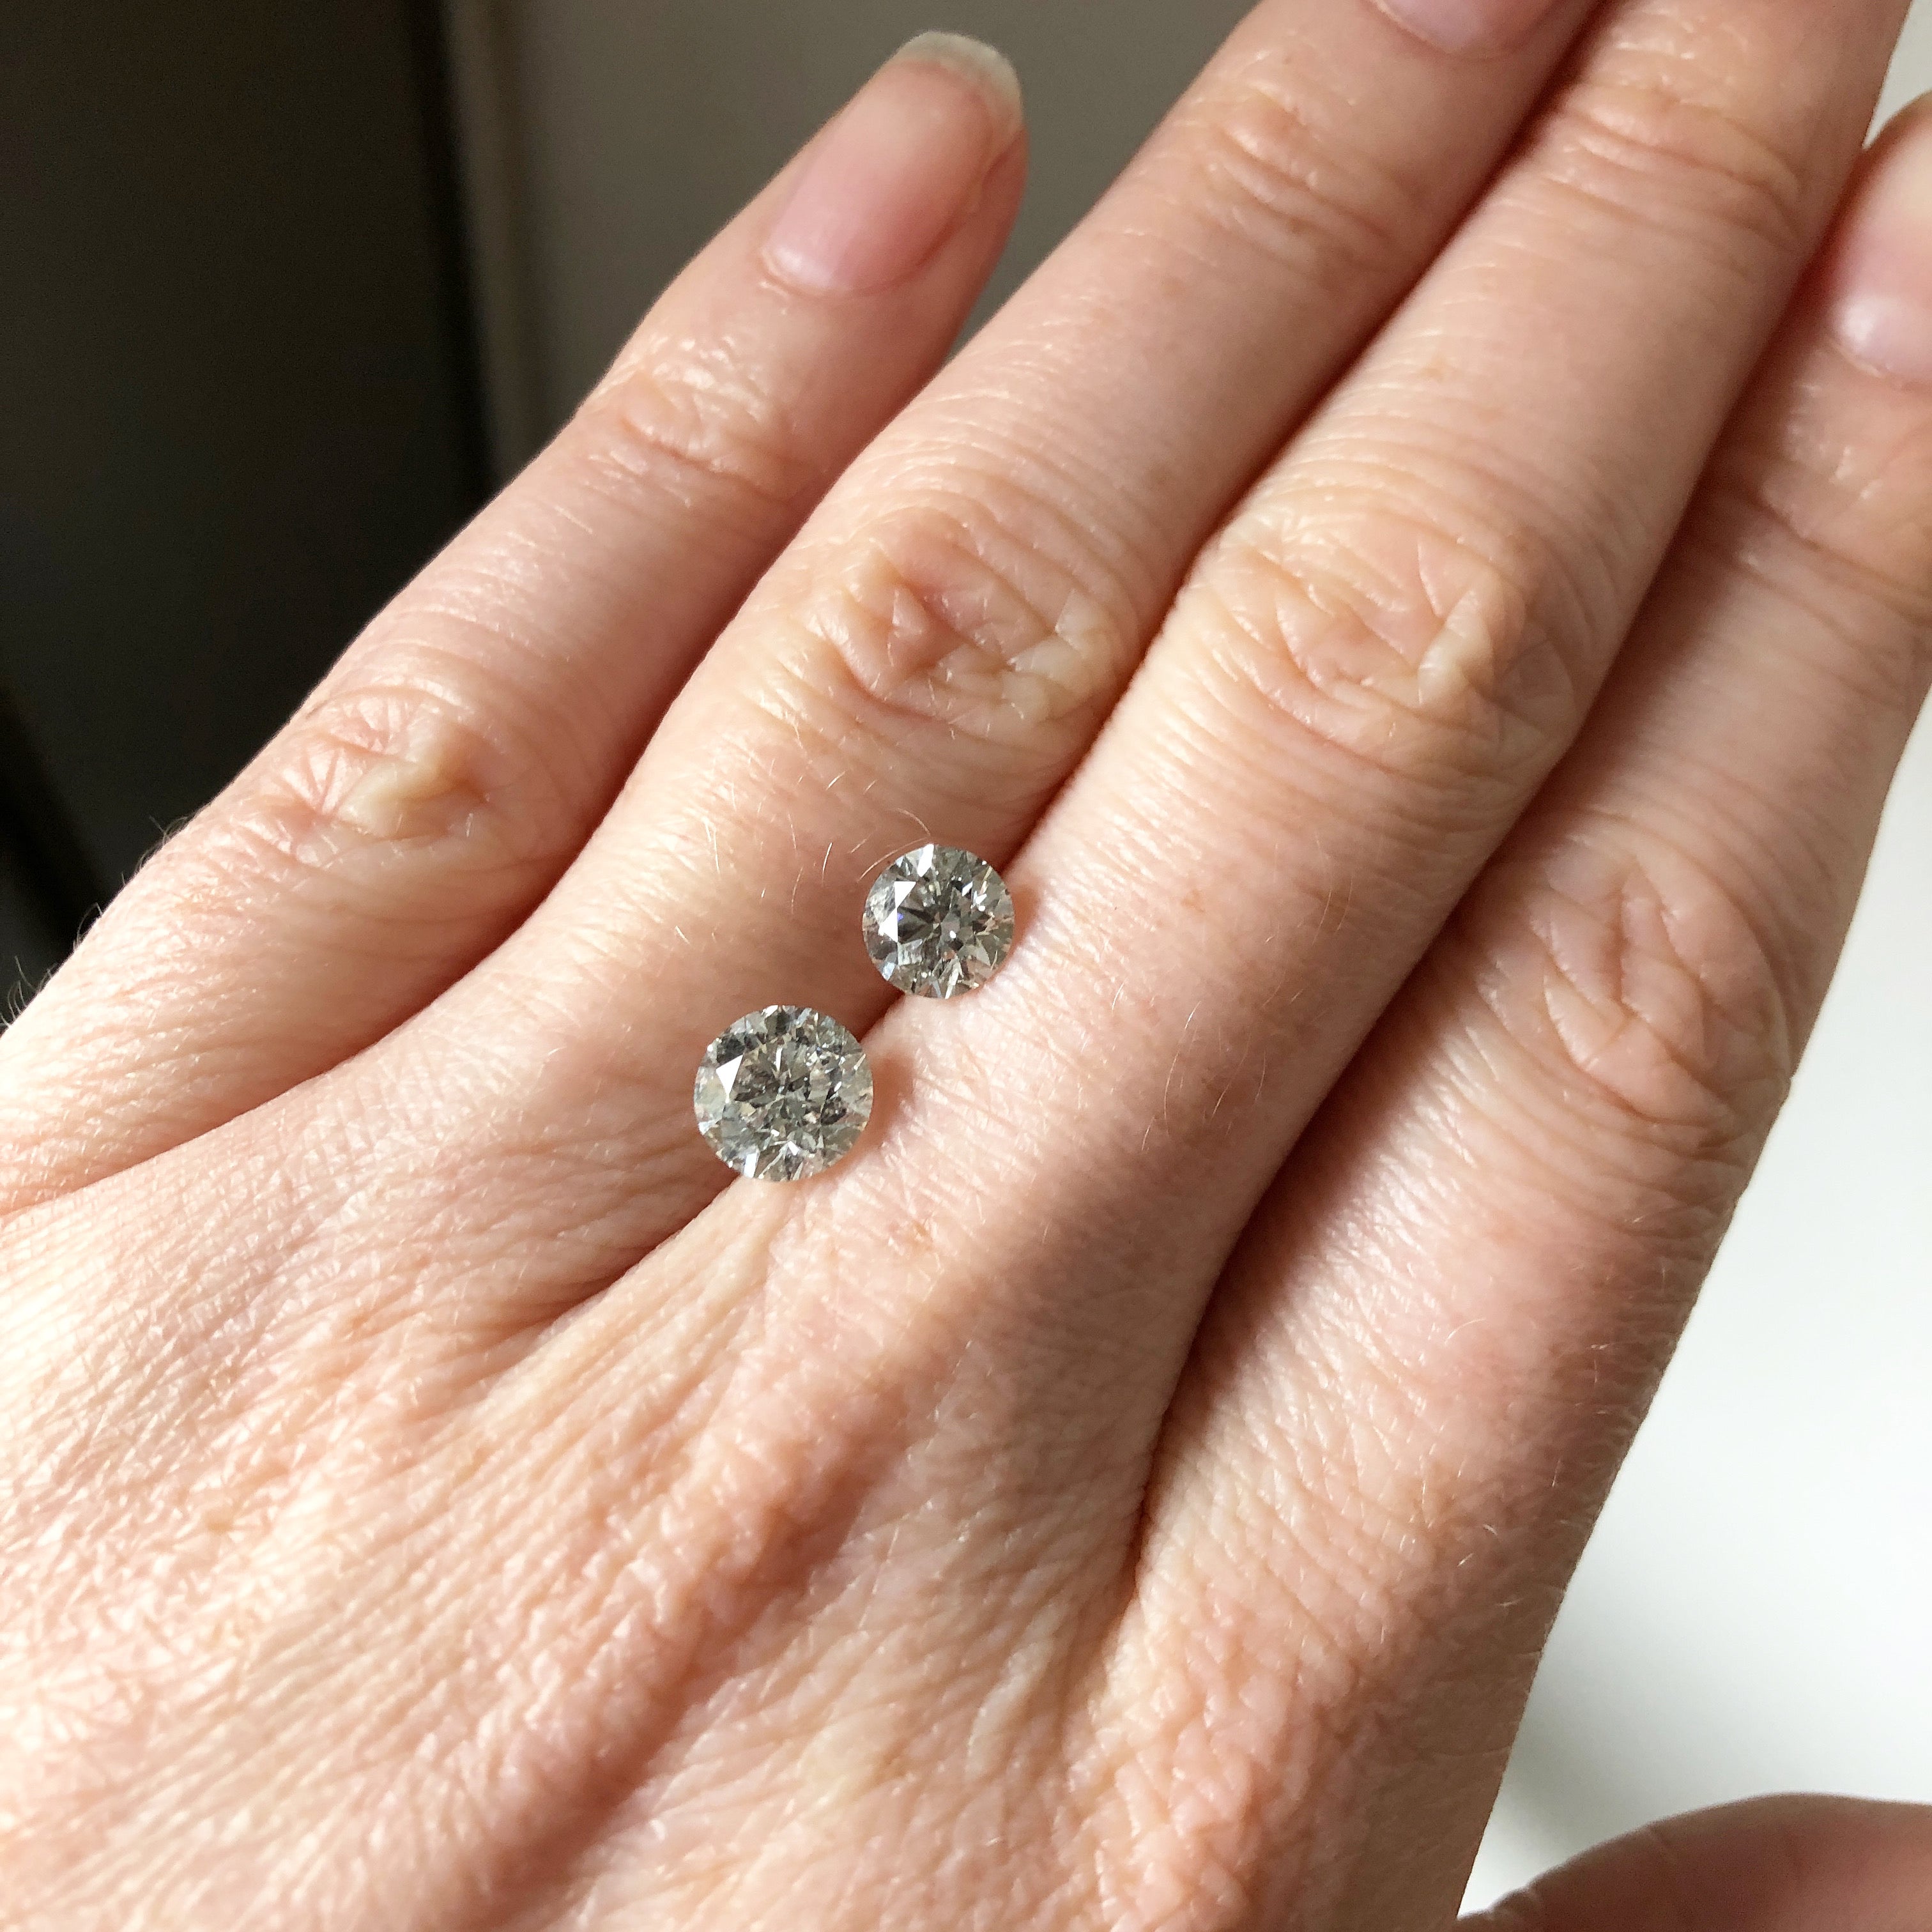 Divorce Rings; why it's a great idea to repurpose your Engagement Ring